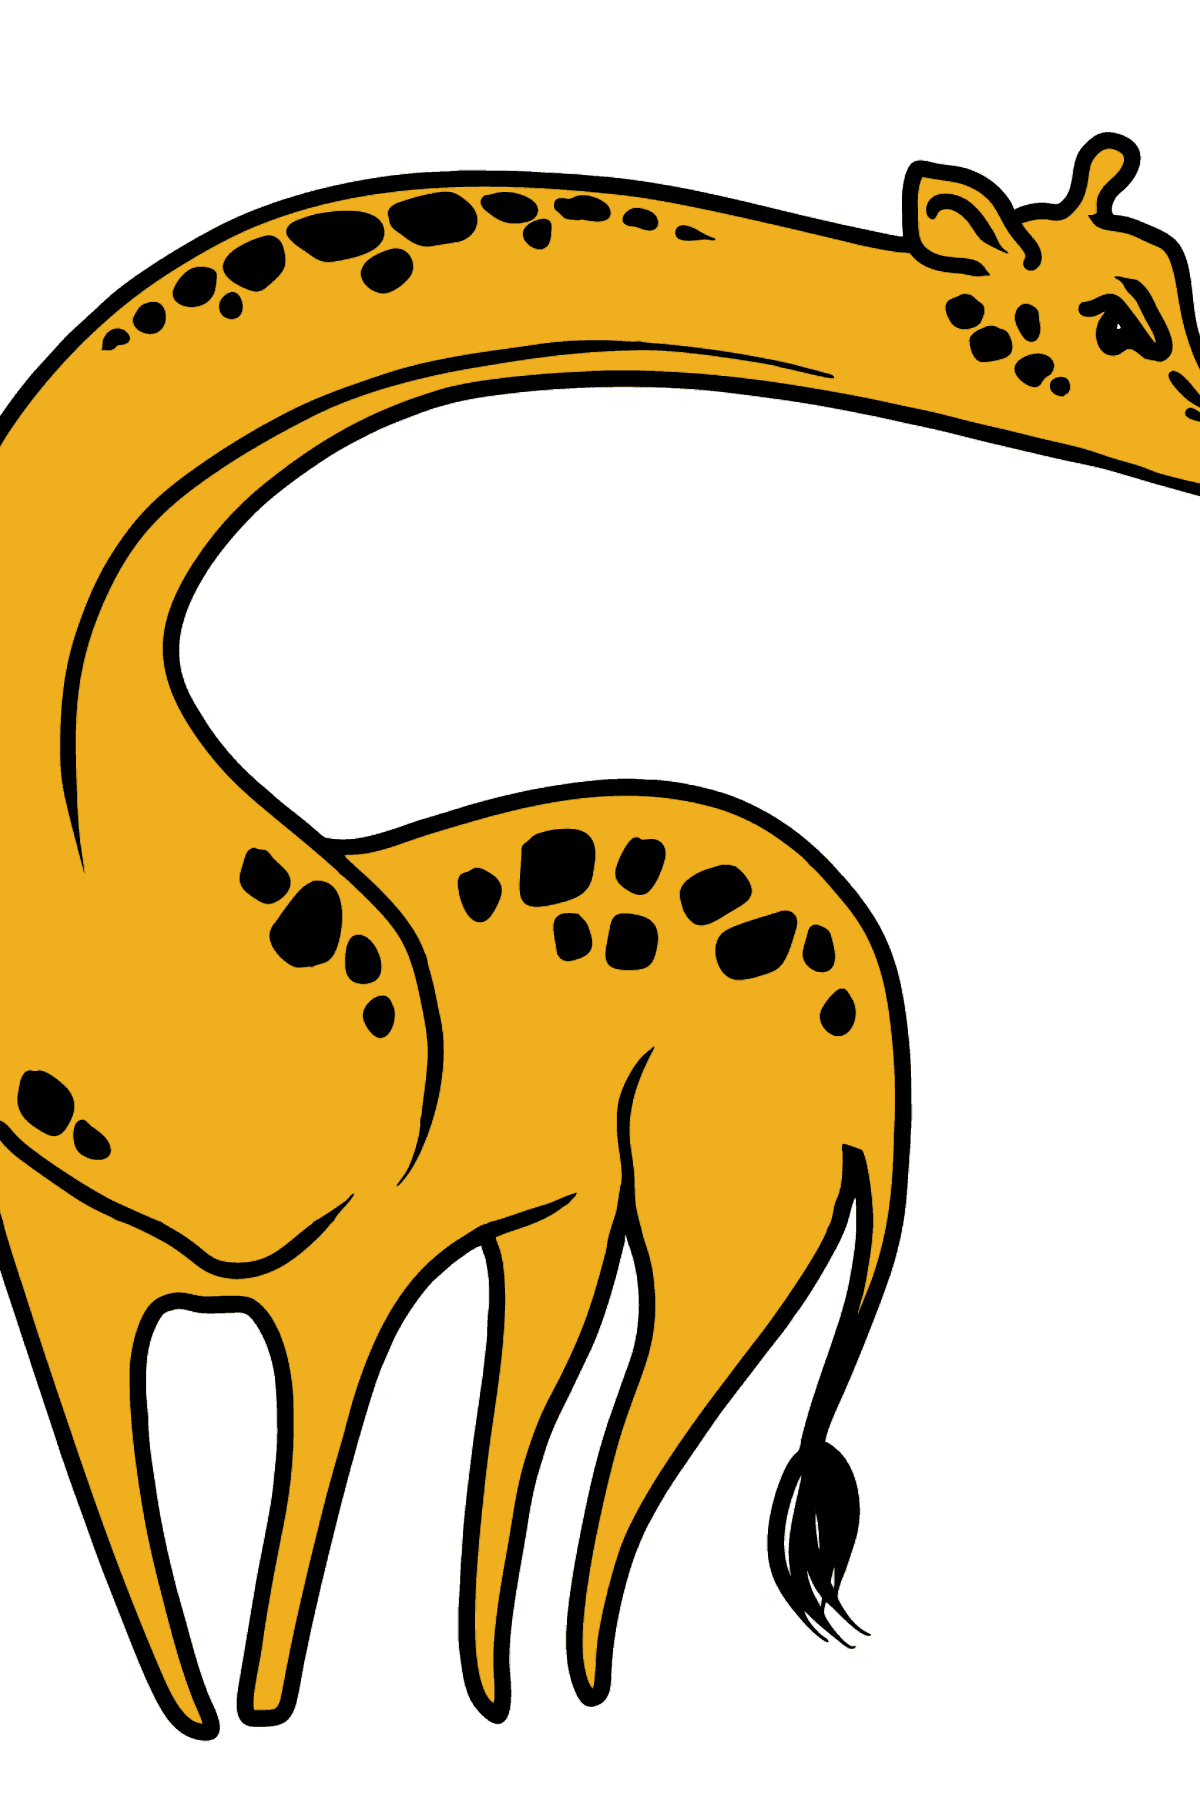 Giraffe coloring page - Coloring Pages for Kids